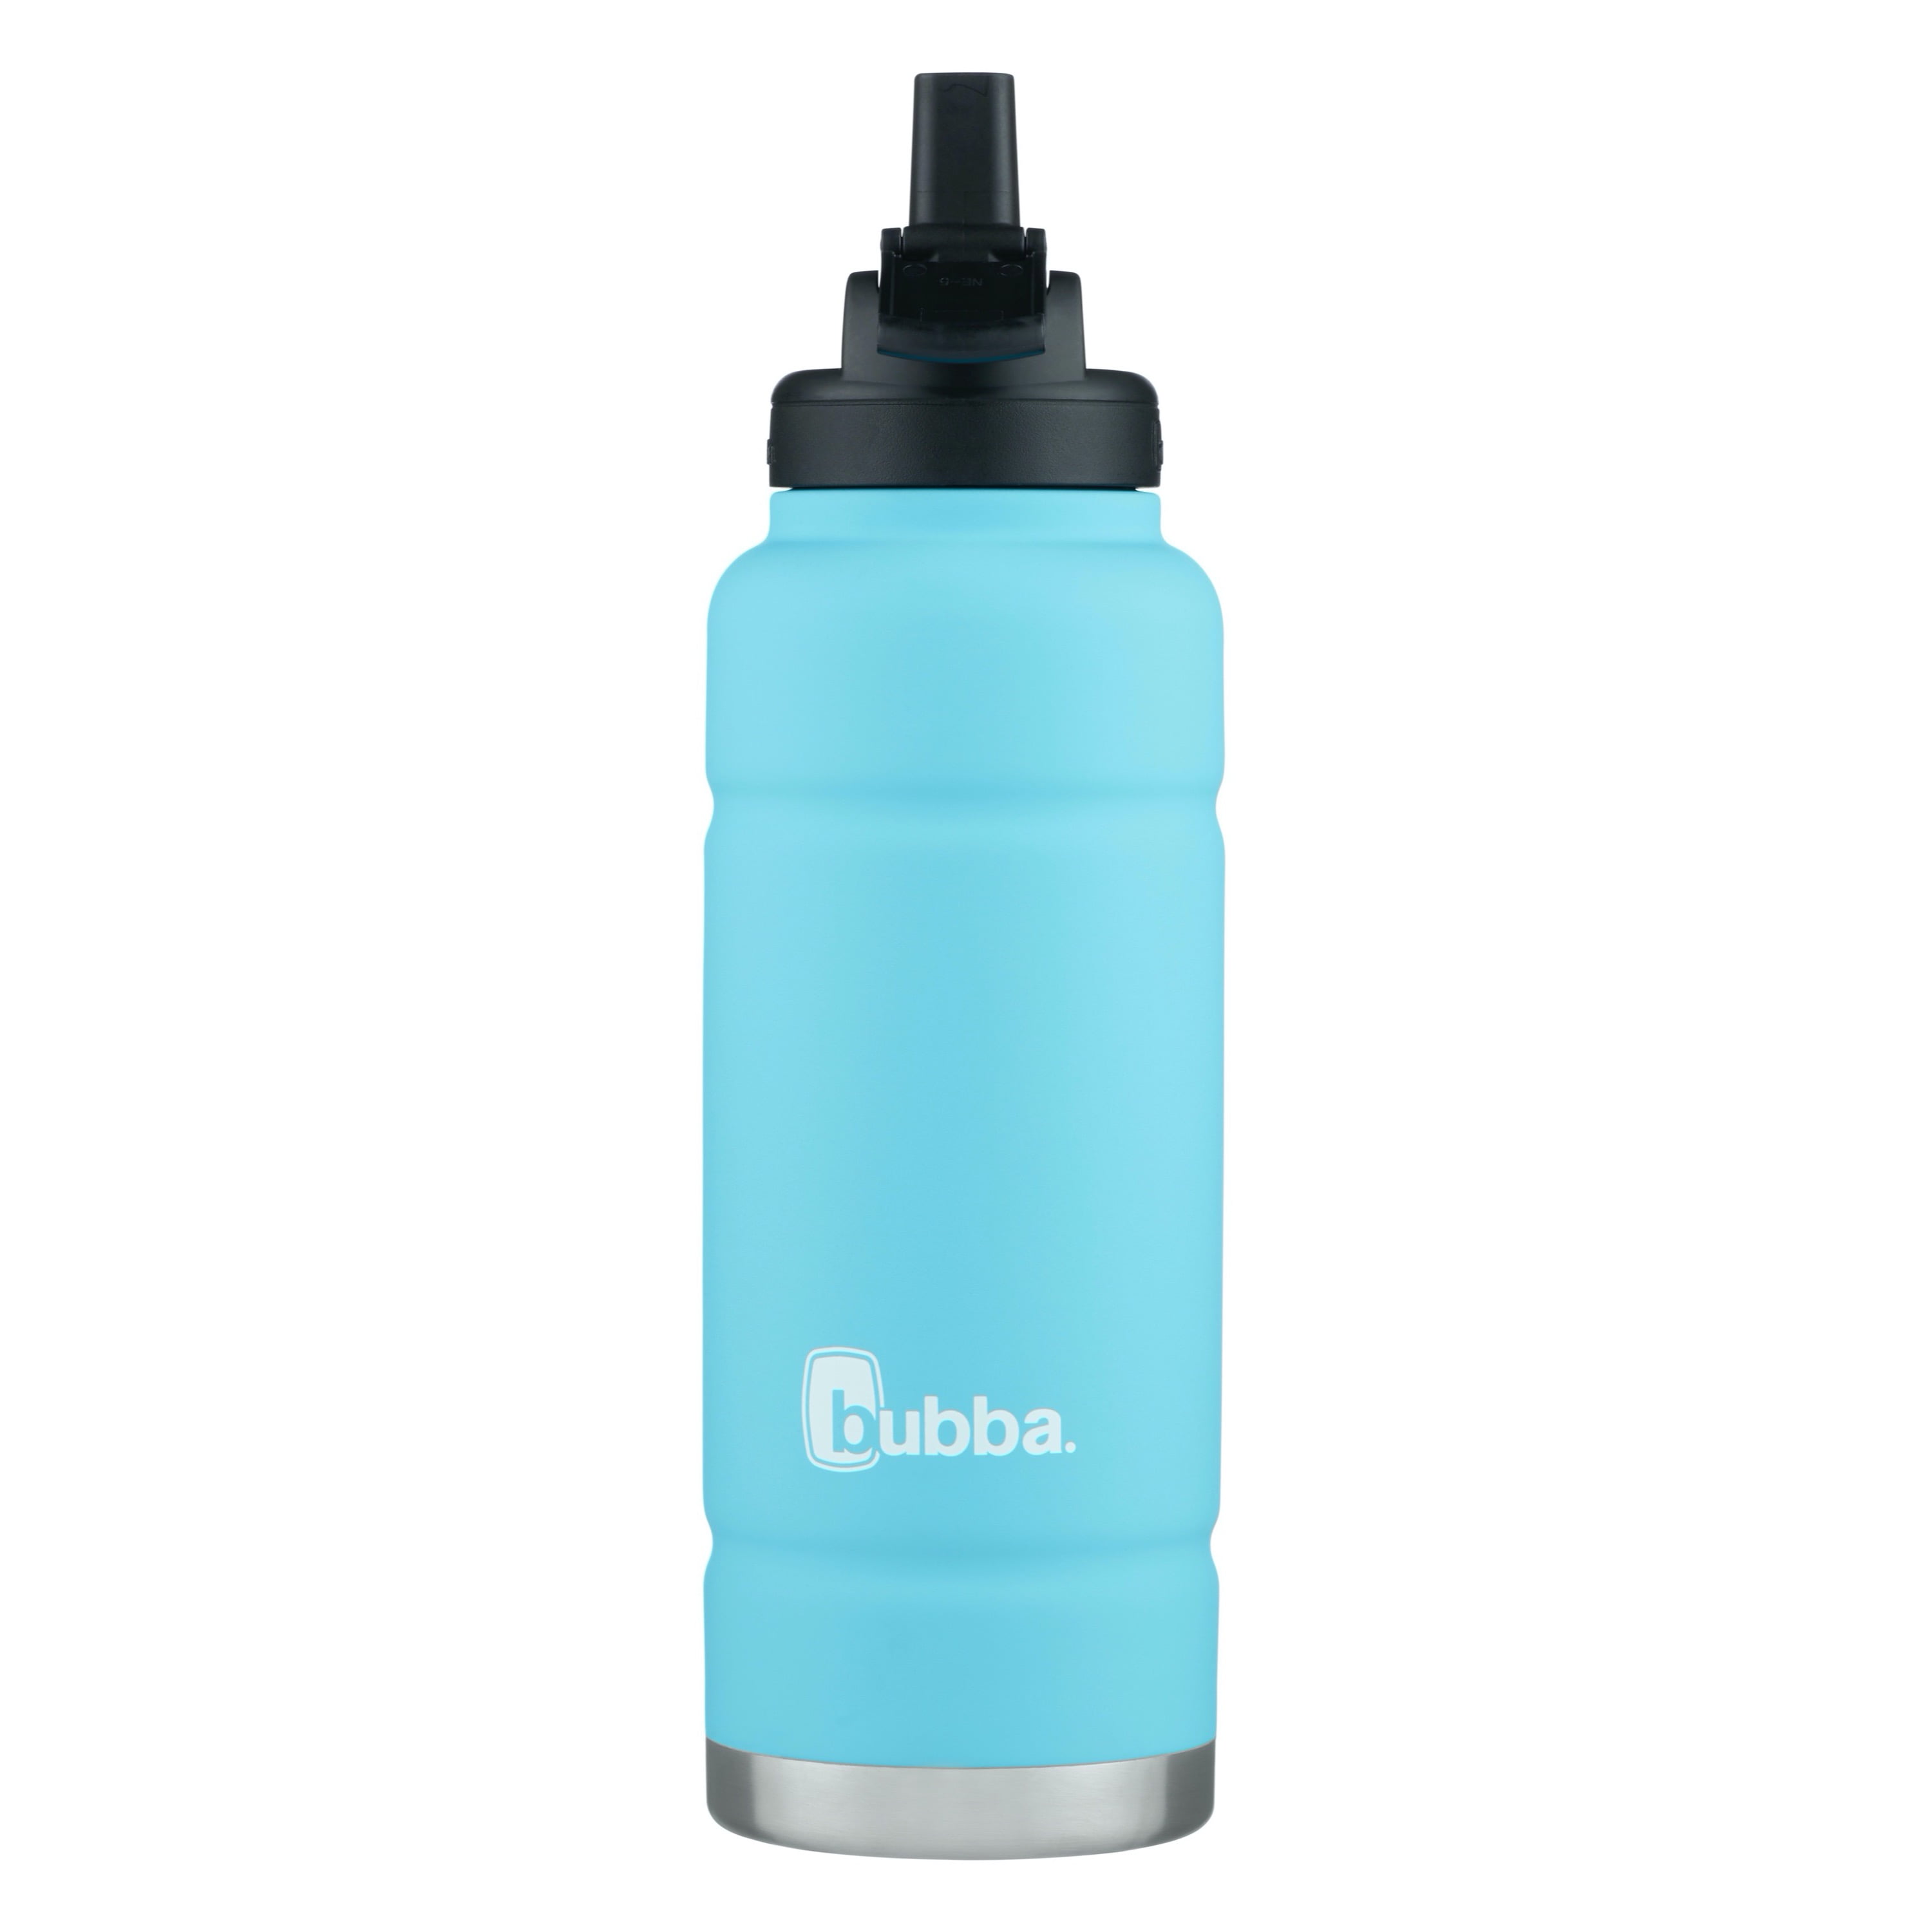 Bubba 40 Oz. Radiant Stainless Steel Rubberized Water Bottle, Electric  Berry, Water Bottles, Sports & Outdoors